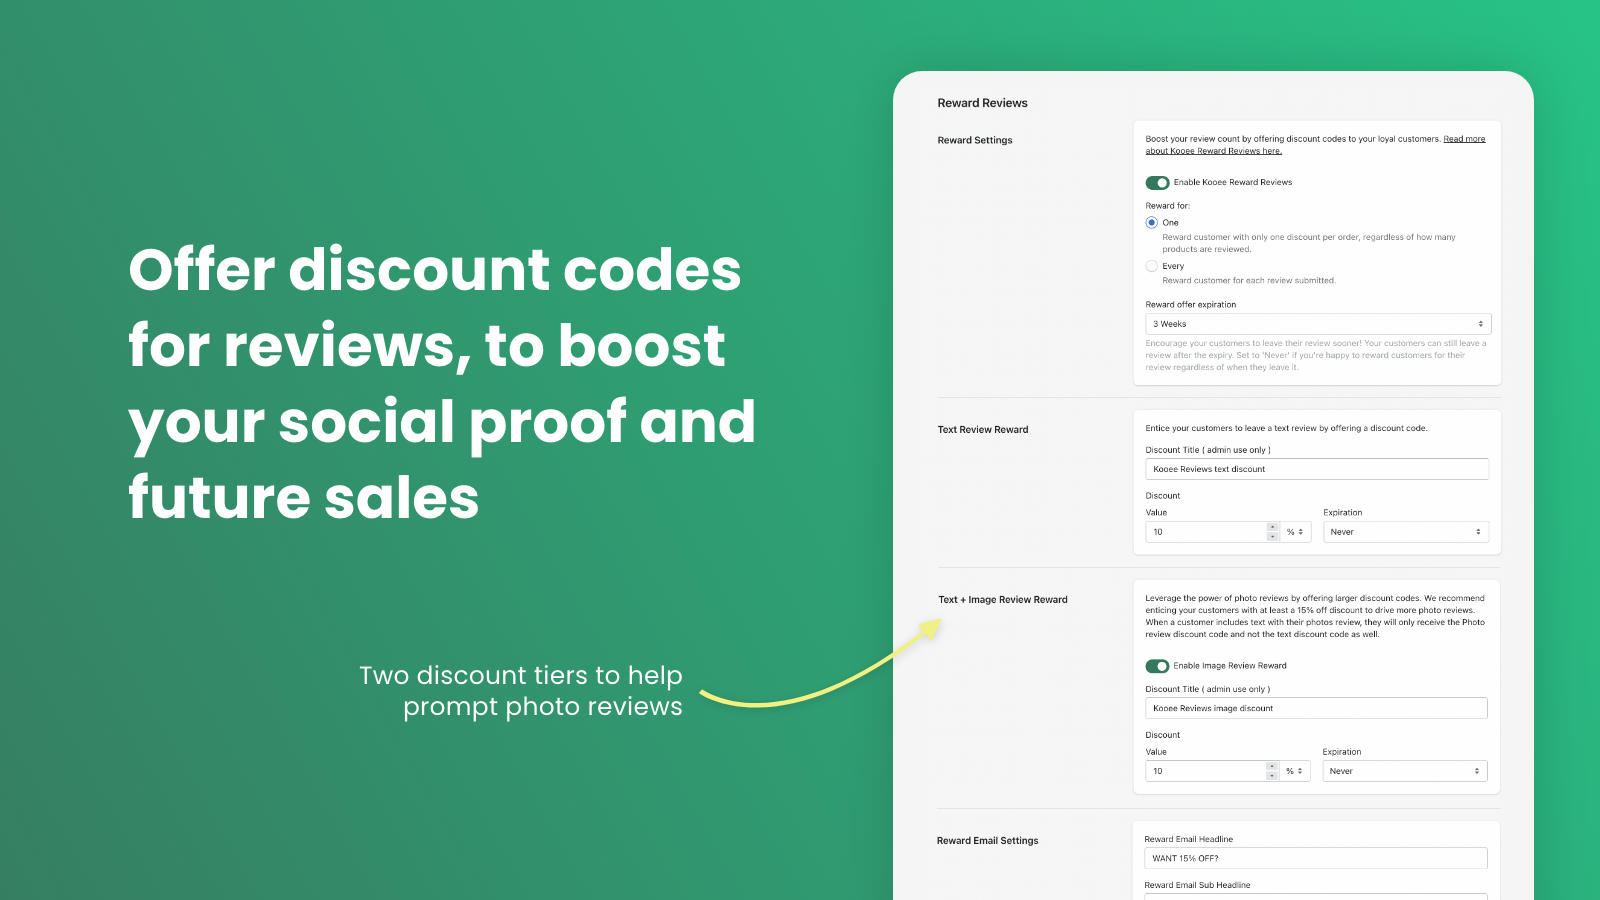 Boost your review count and social proof with discounts